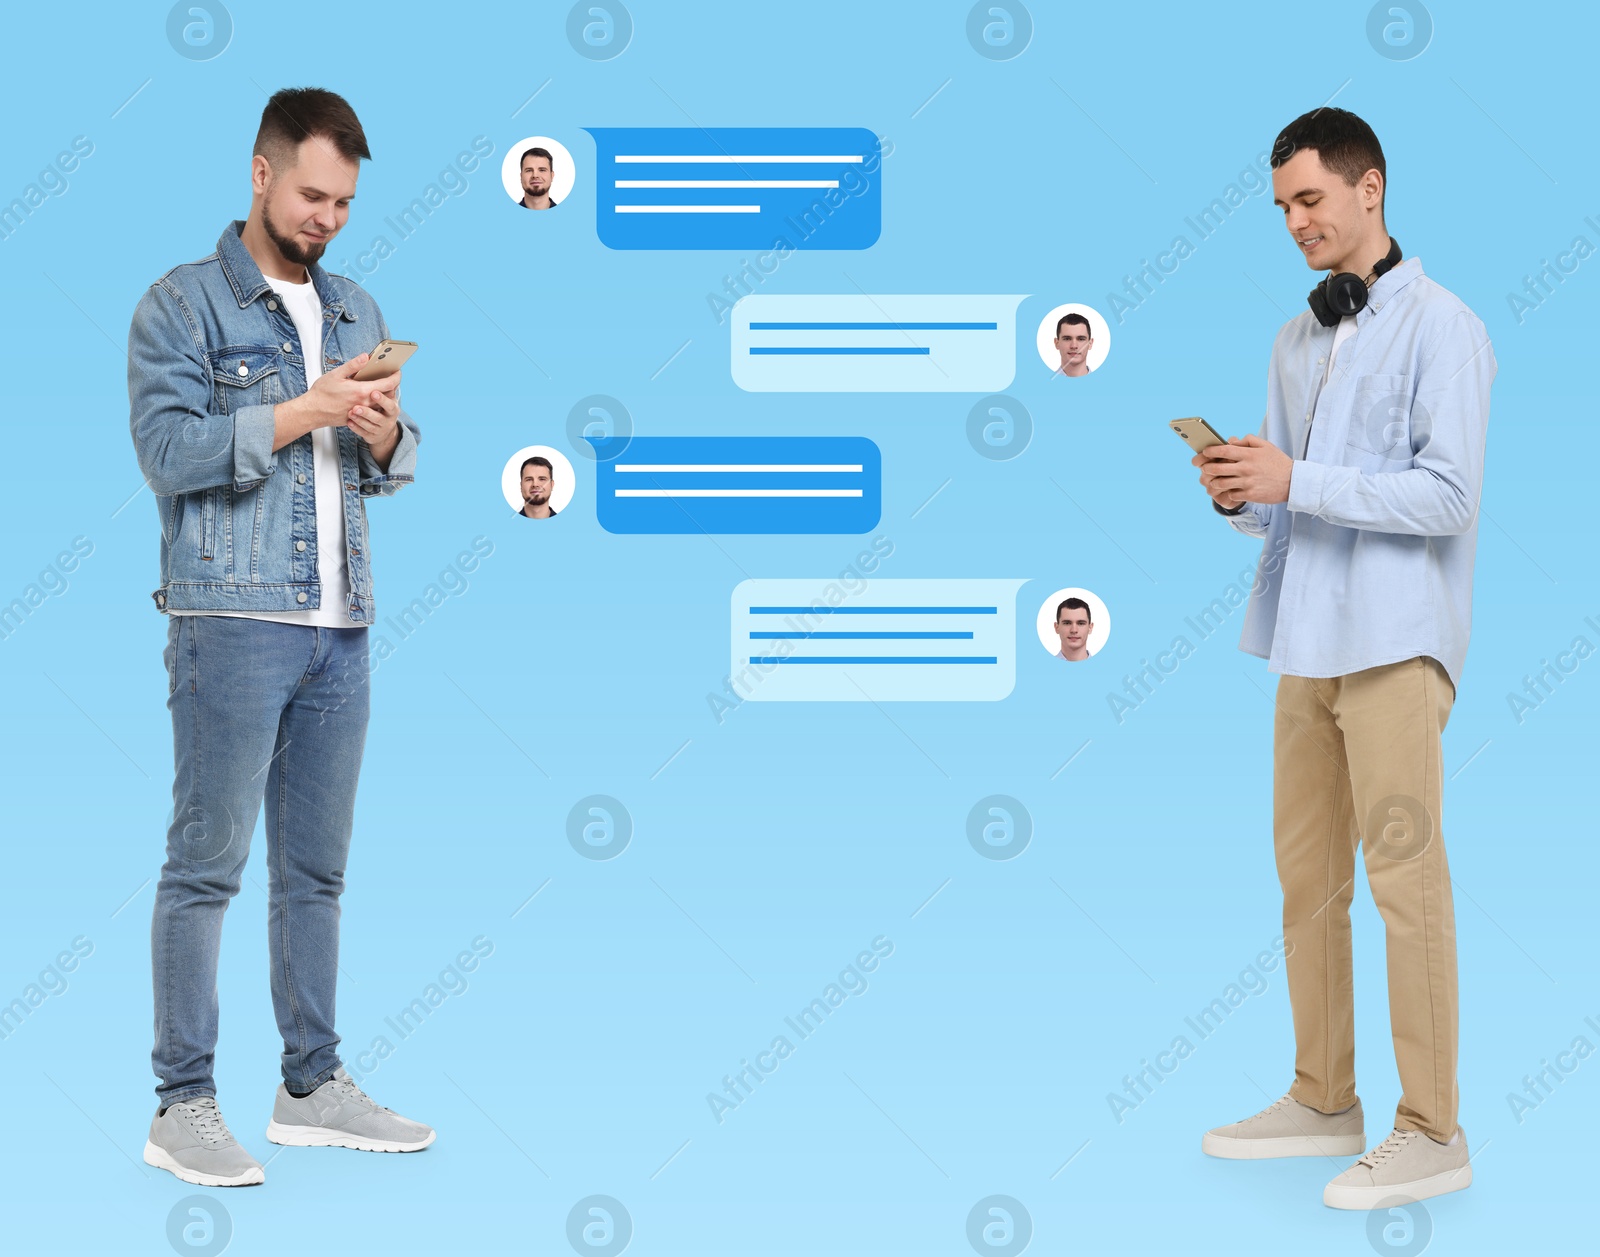 Image of Men with smartphones texting on light blue background. Message bubbles between them